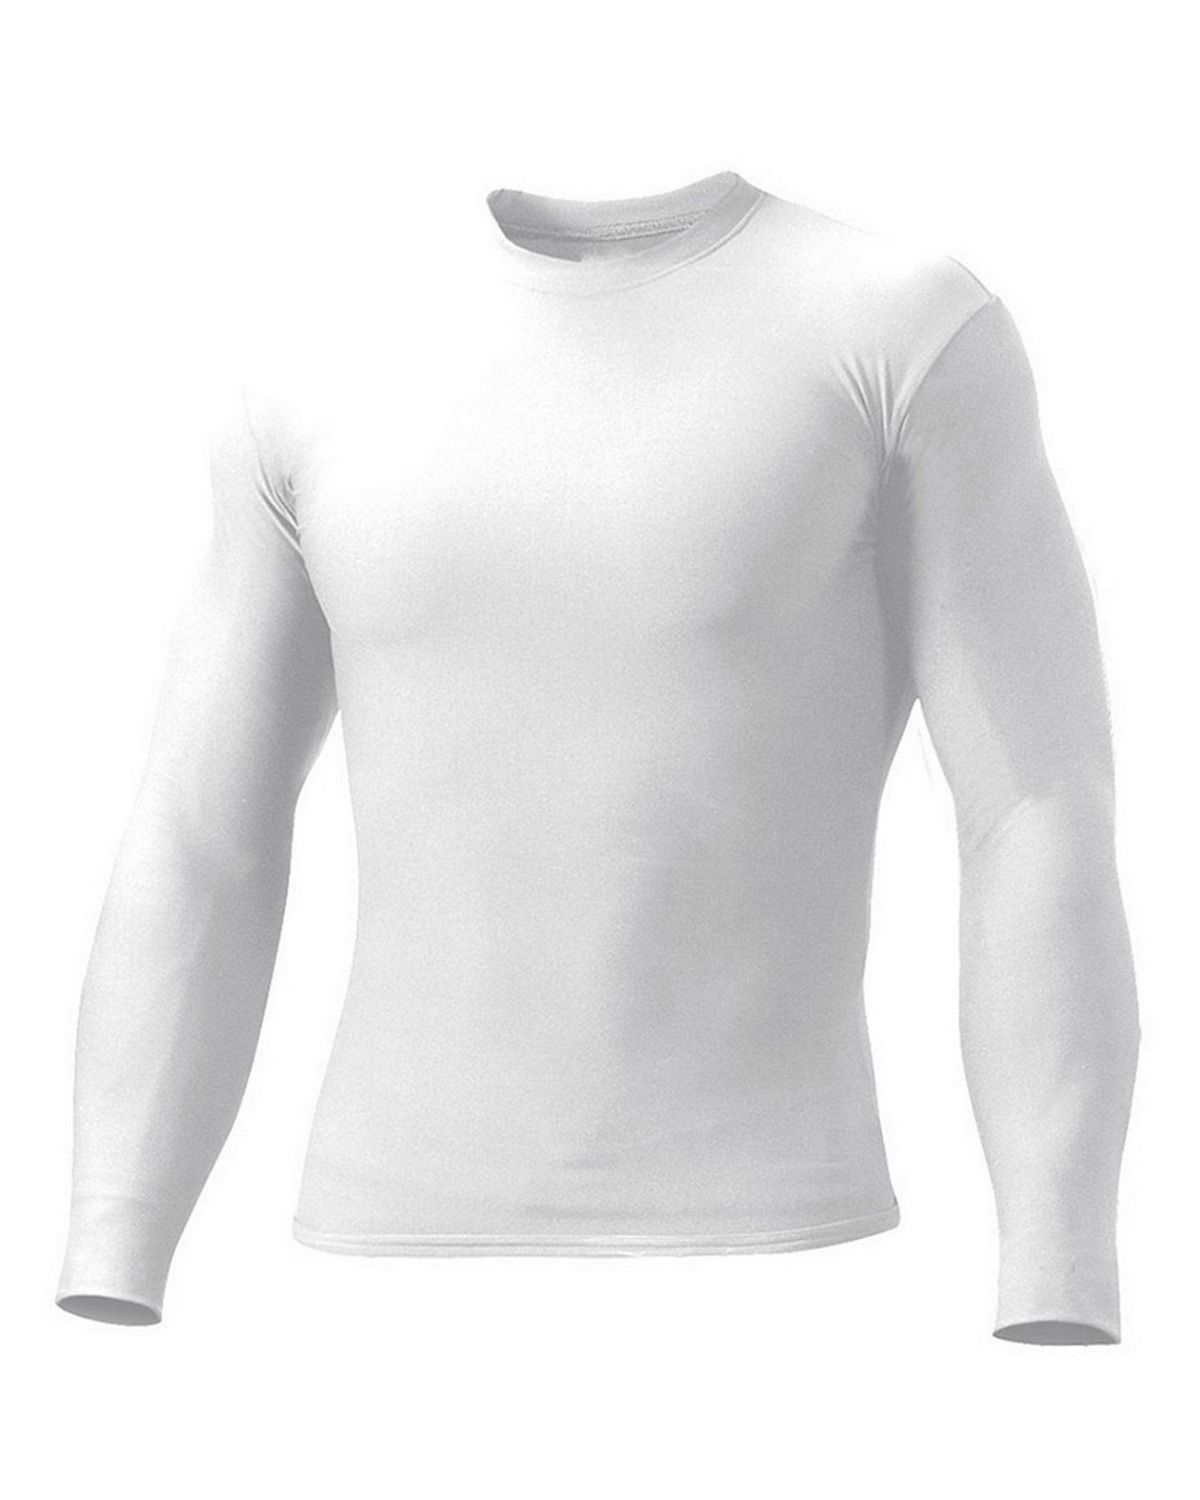 A4 N3133 Men's Long Sleeve Compression Crew